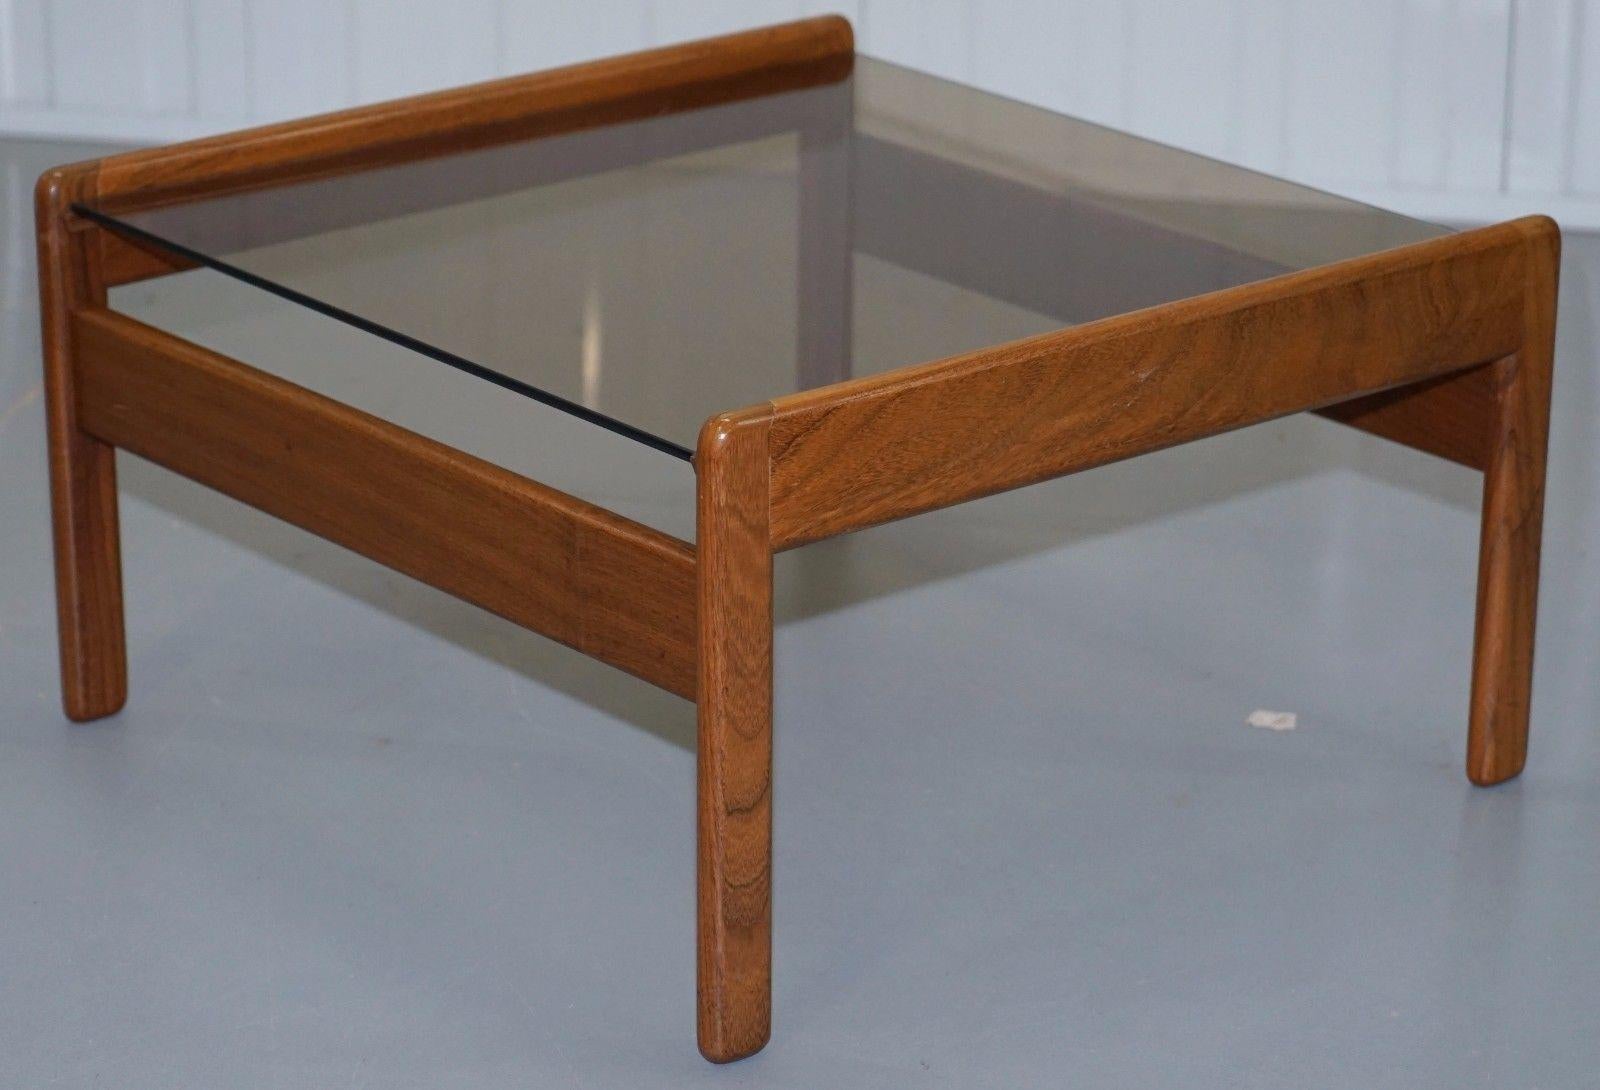 Pair of Mid-Century Modern 1960s Danish Teak Side Tables with Glass Tops Lovely 1